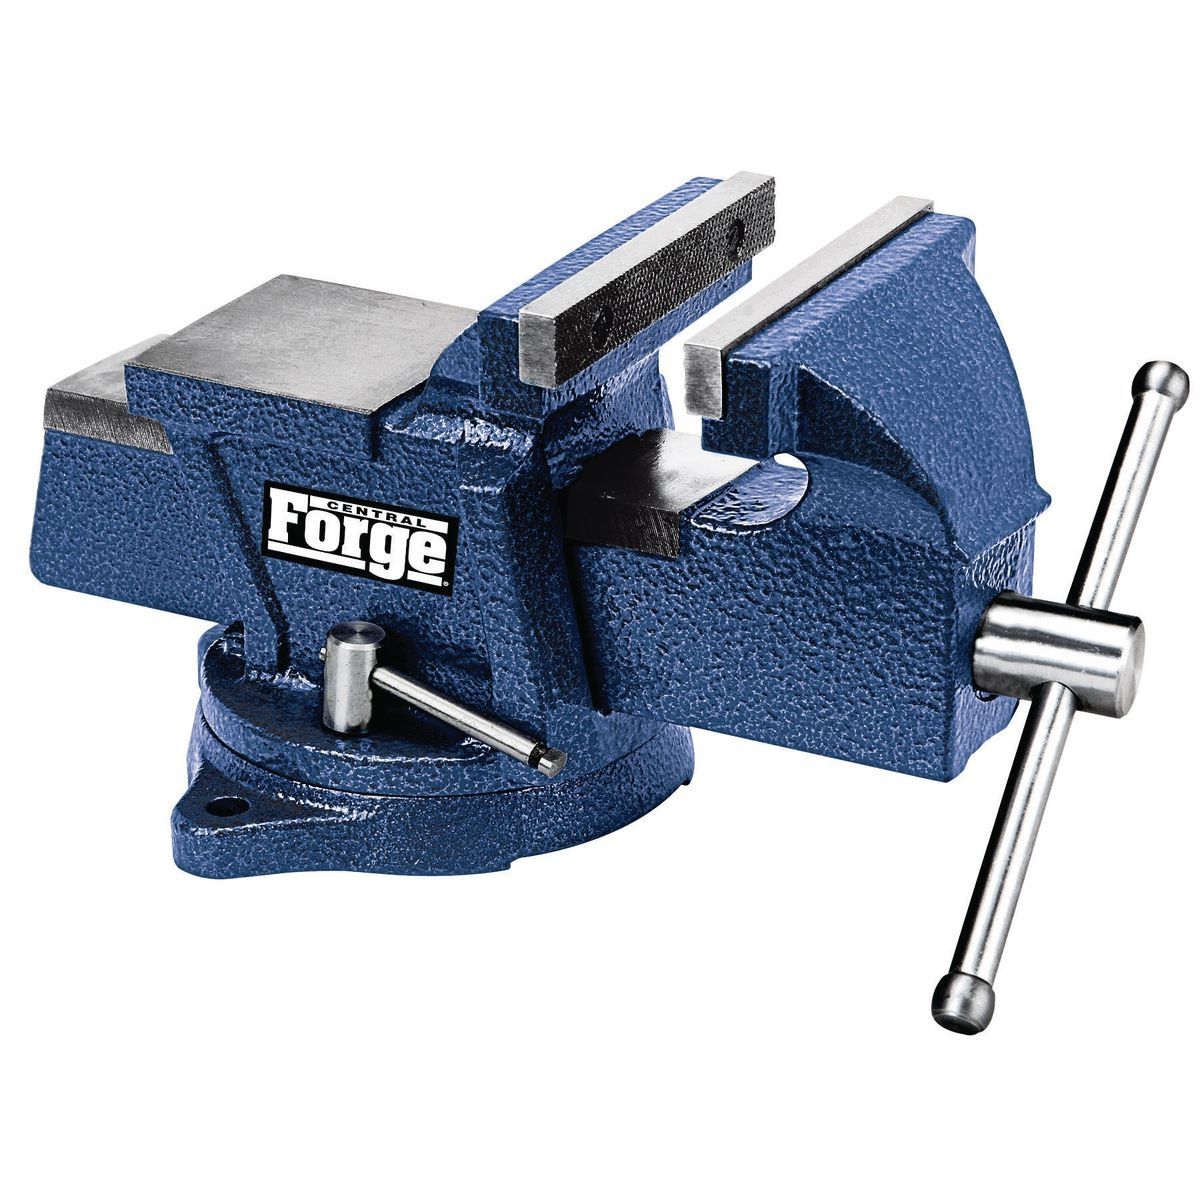 CENTRAL FORGE 4 in. Swivel Vise with Anvil